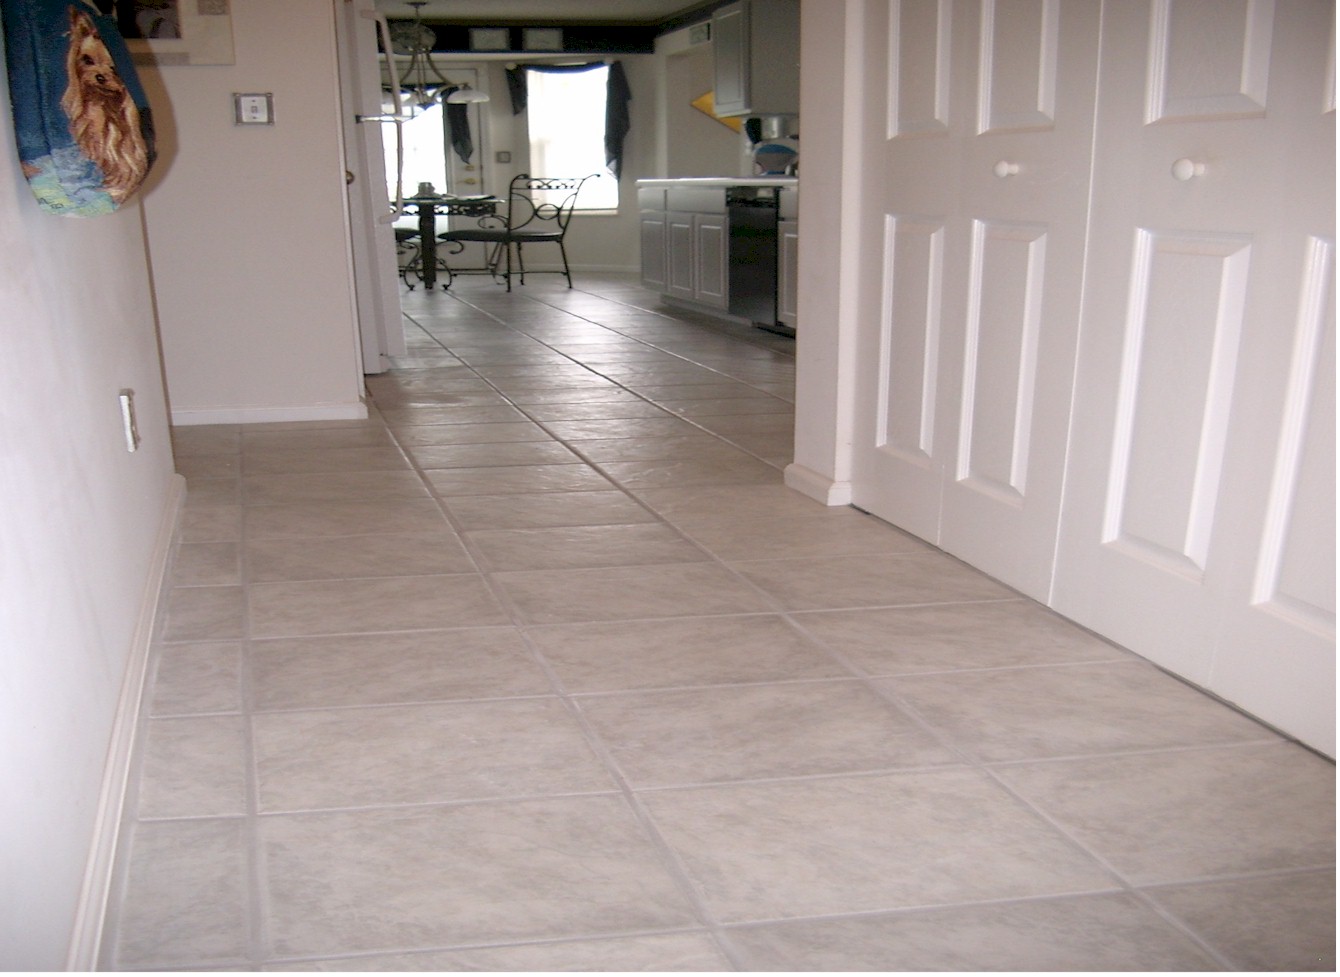 10 Useful Floor Tile Patterns To Improve Home Interior ...